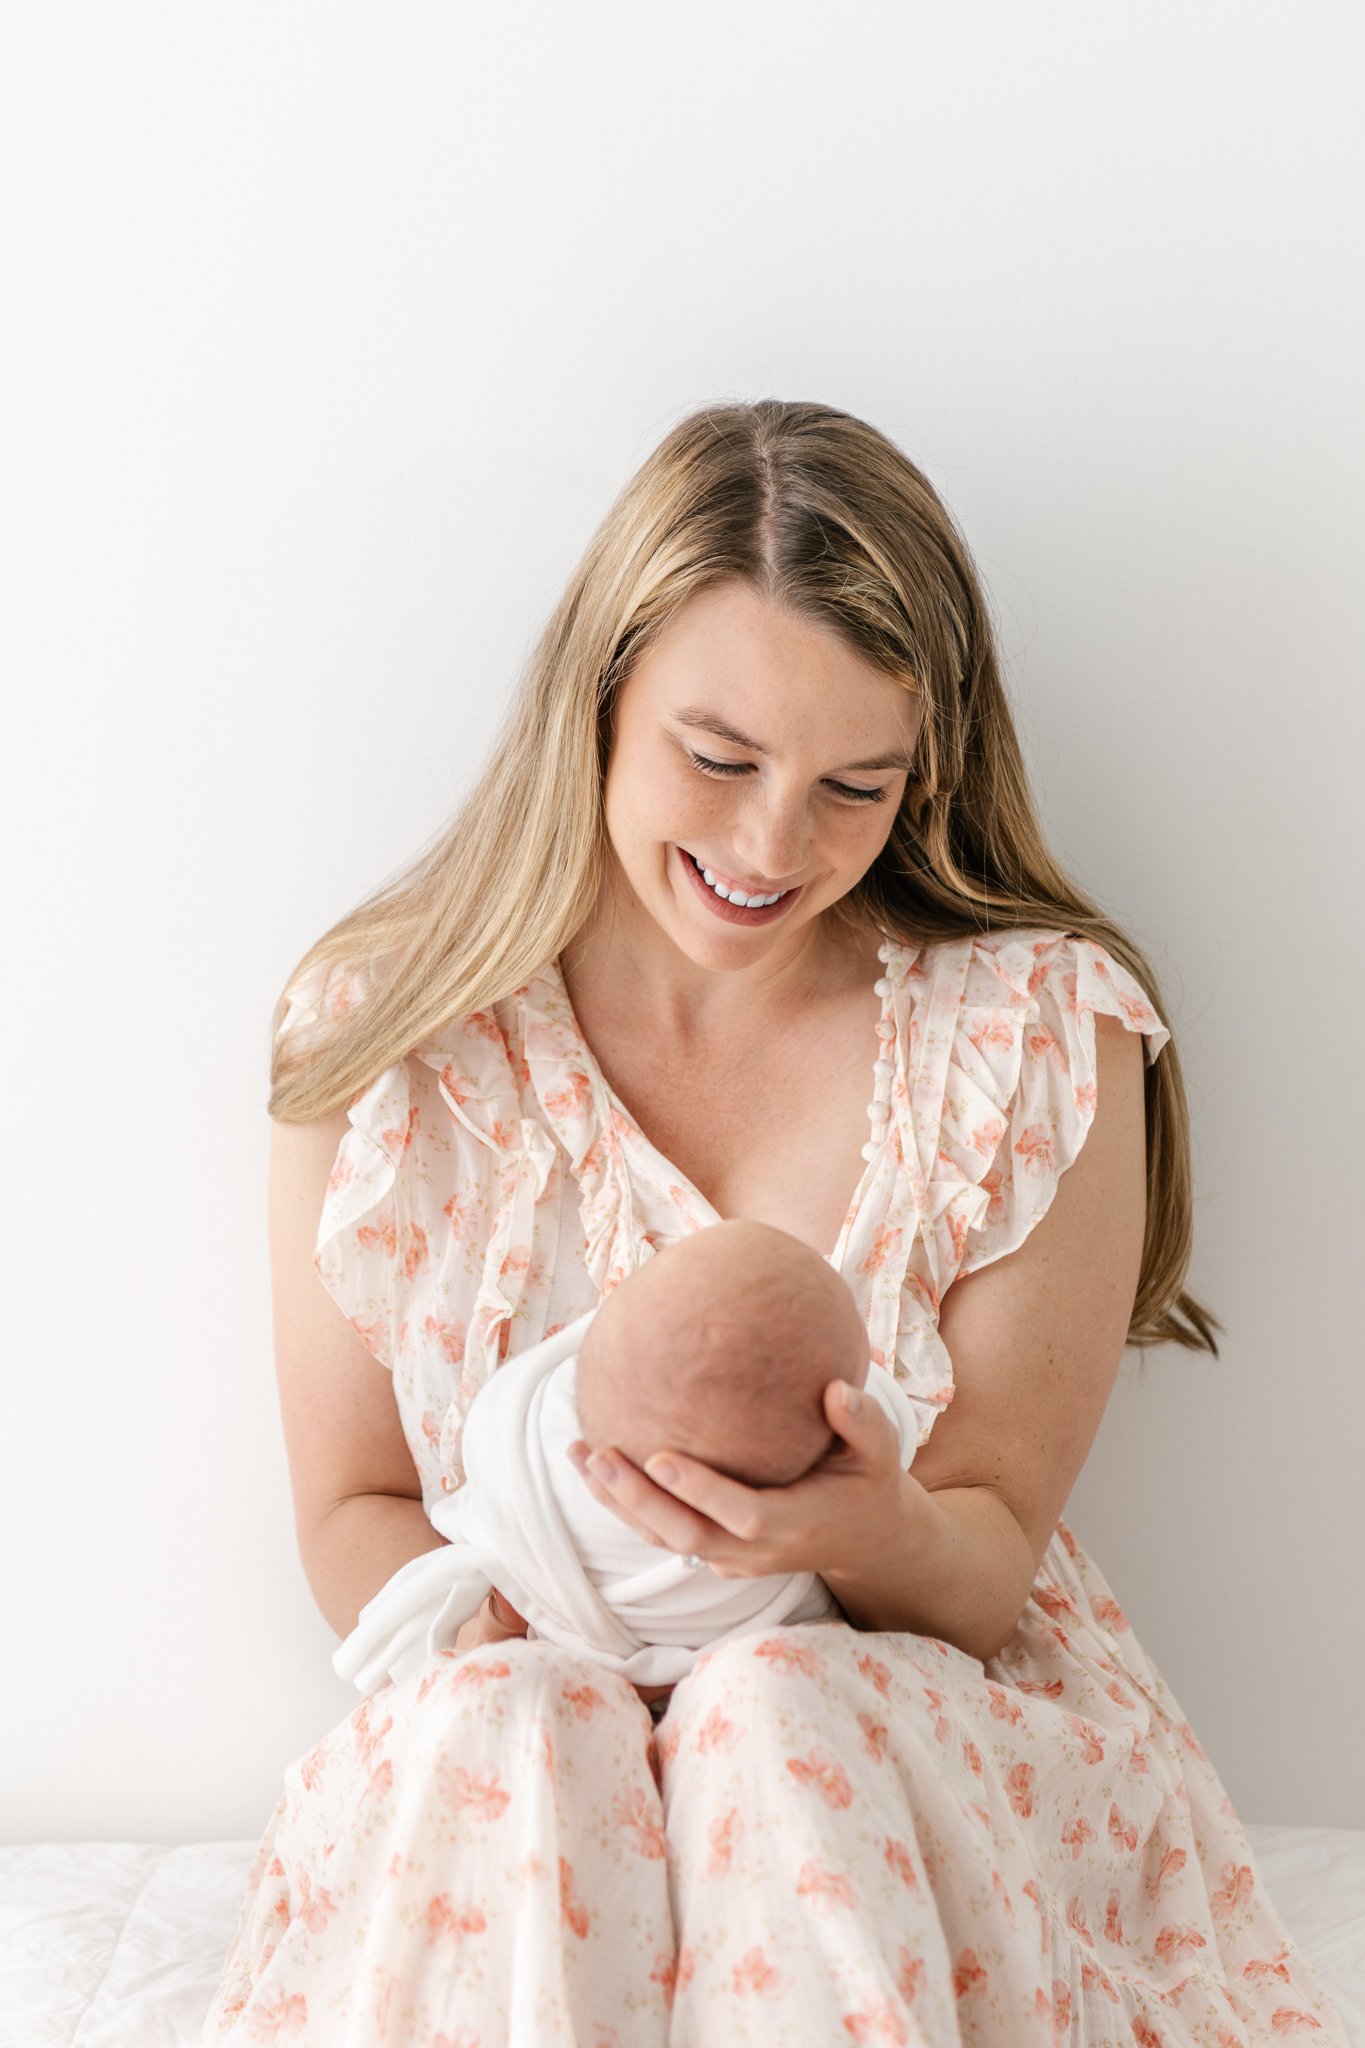  Blonde mother looks lovingly down at her baby girl by Nicole Hawkins Photography a studio family photographer. mother newborn fresh 48 studio portraits #NicoleHawkinsPhotography #NicoleHawkinsNewborns #StudioNewborn #StudioFamily #EastCoastNewbornPh